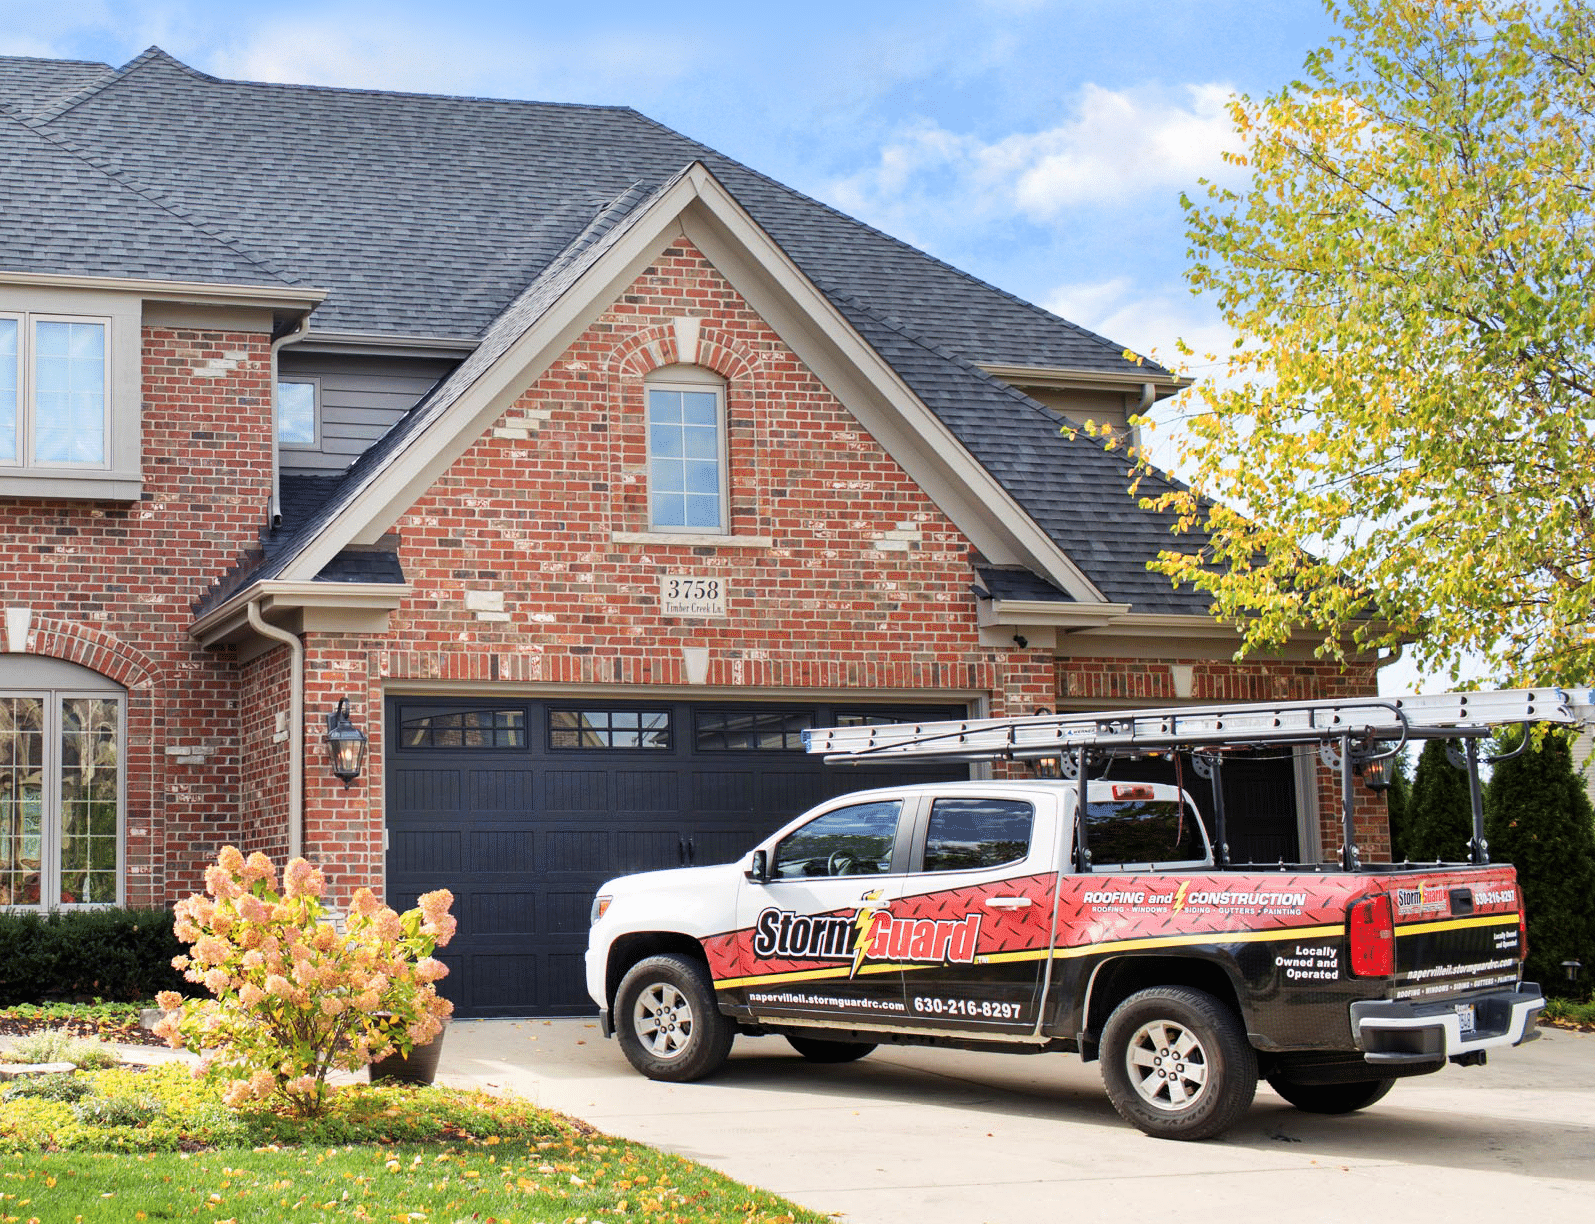 Brick House with Storm Guard Restoration Services Truck In Driveway - Southwest Austin